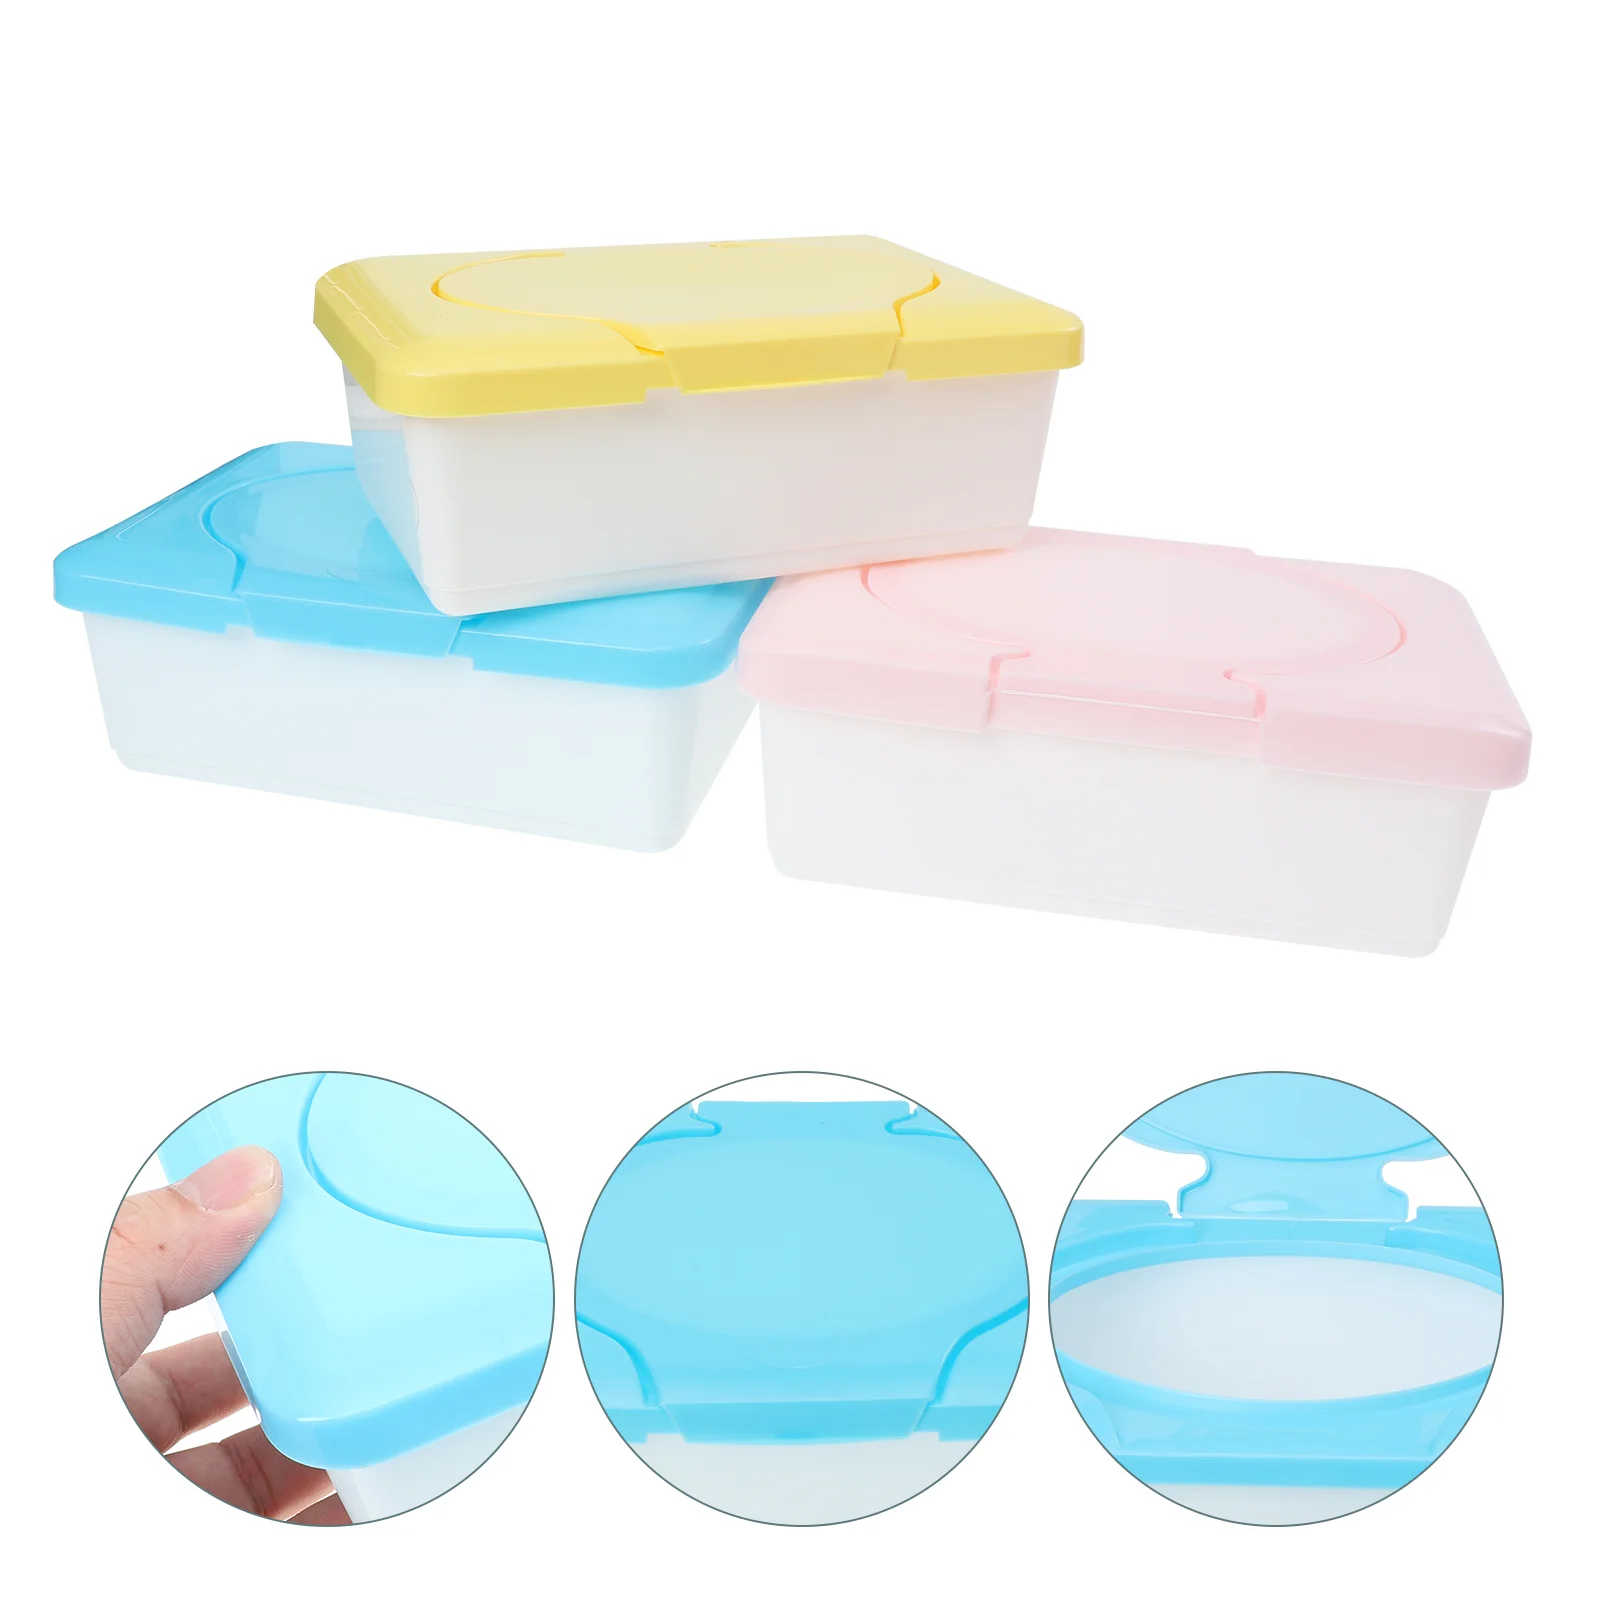 

3 Pcs Wipe Box Baby Wipes Holder Infant Dispenser Container with Lid Wet Diapers Tissue Organizer Filling